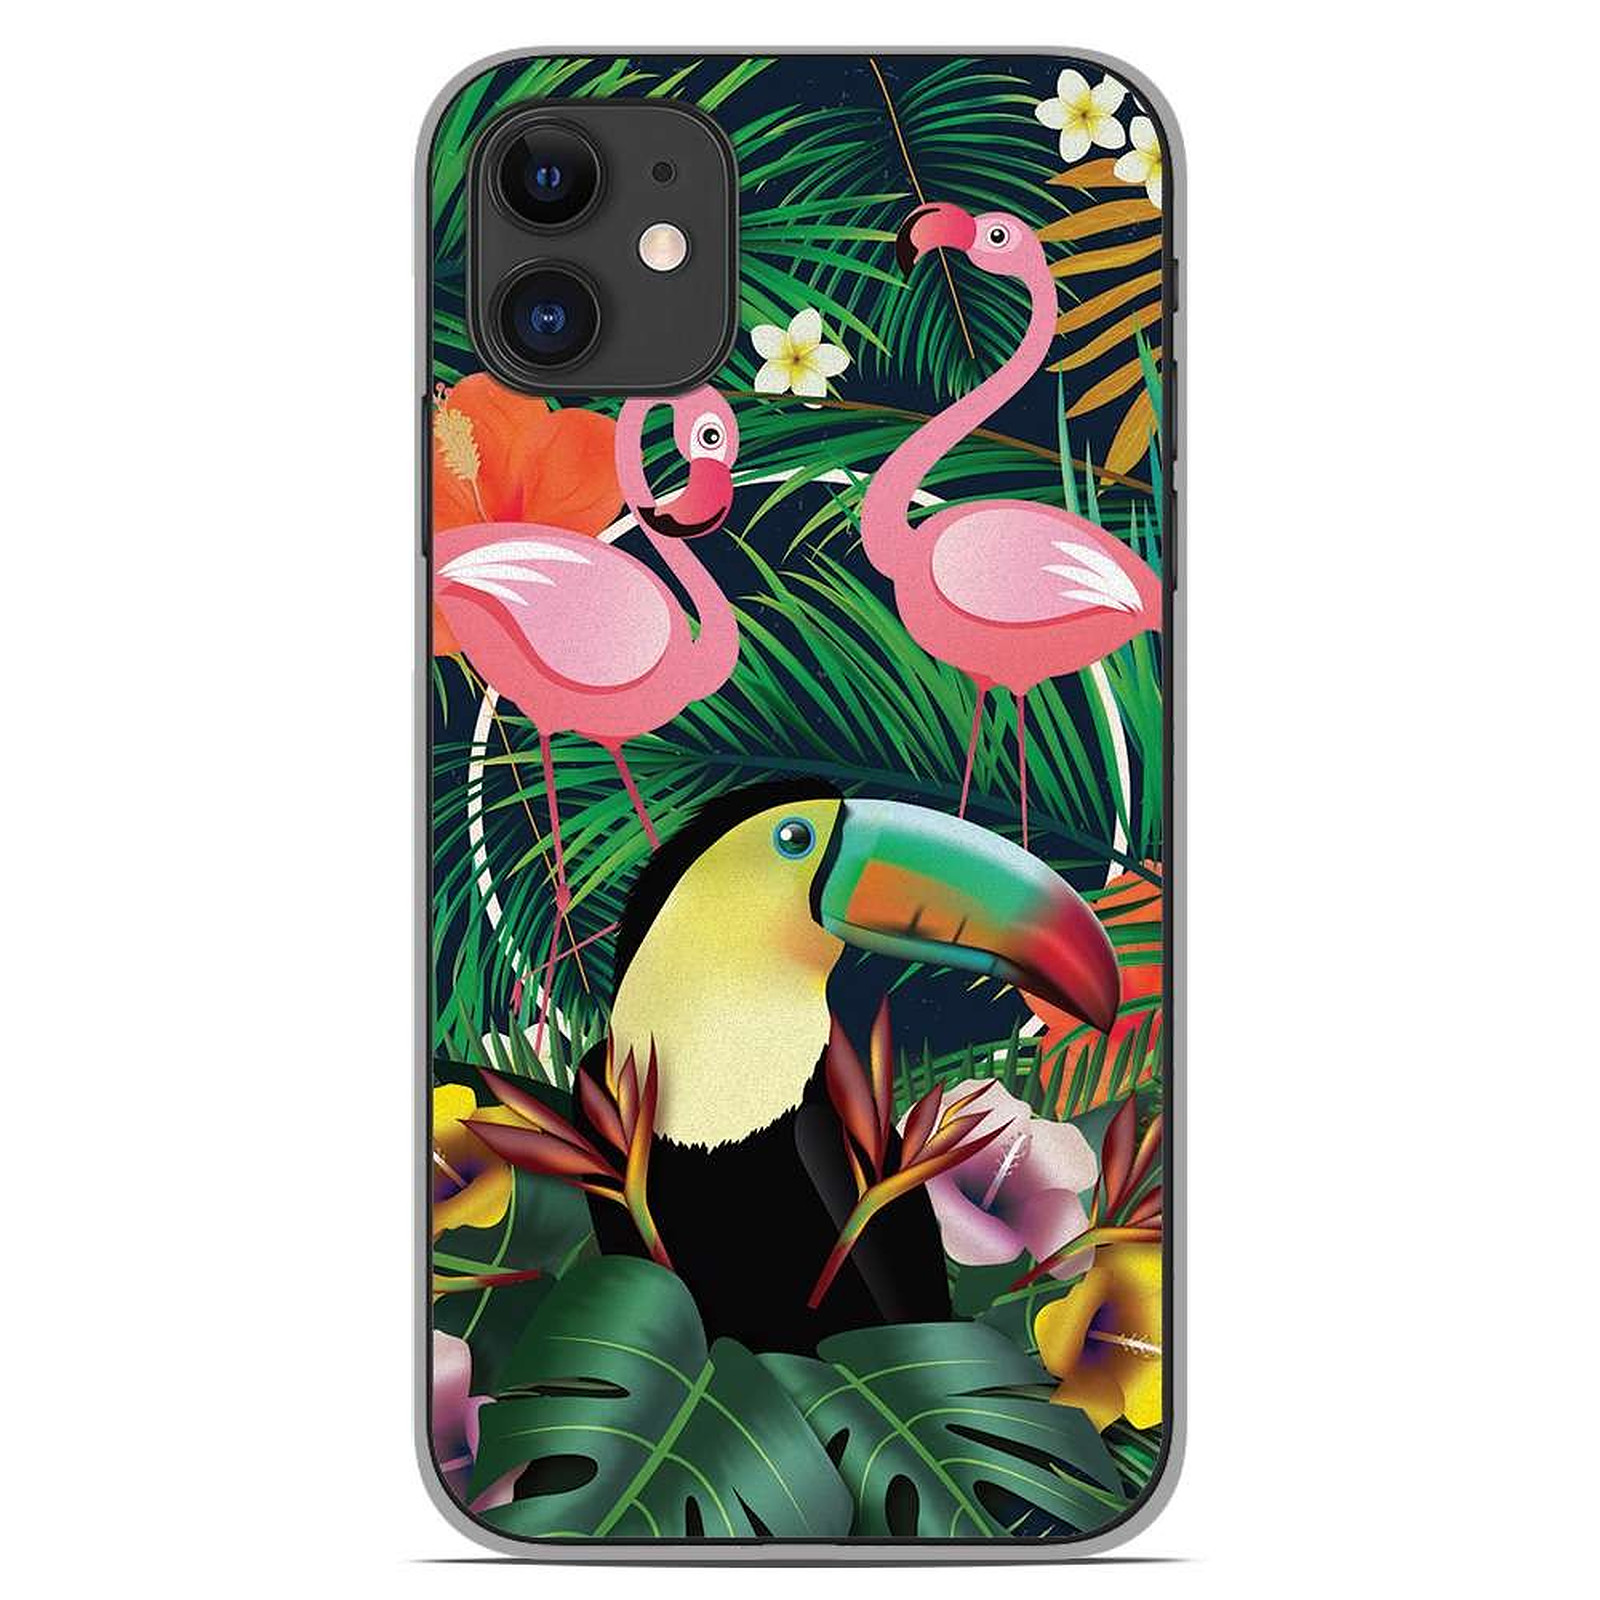 1001 Coques Coque silicone gel Apple iPhone 11 motif Tropical Toucan - Coque telephone 1001Coques